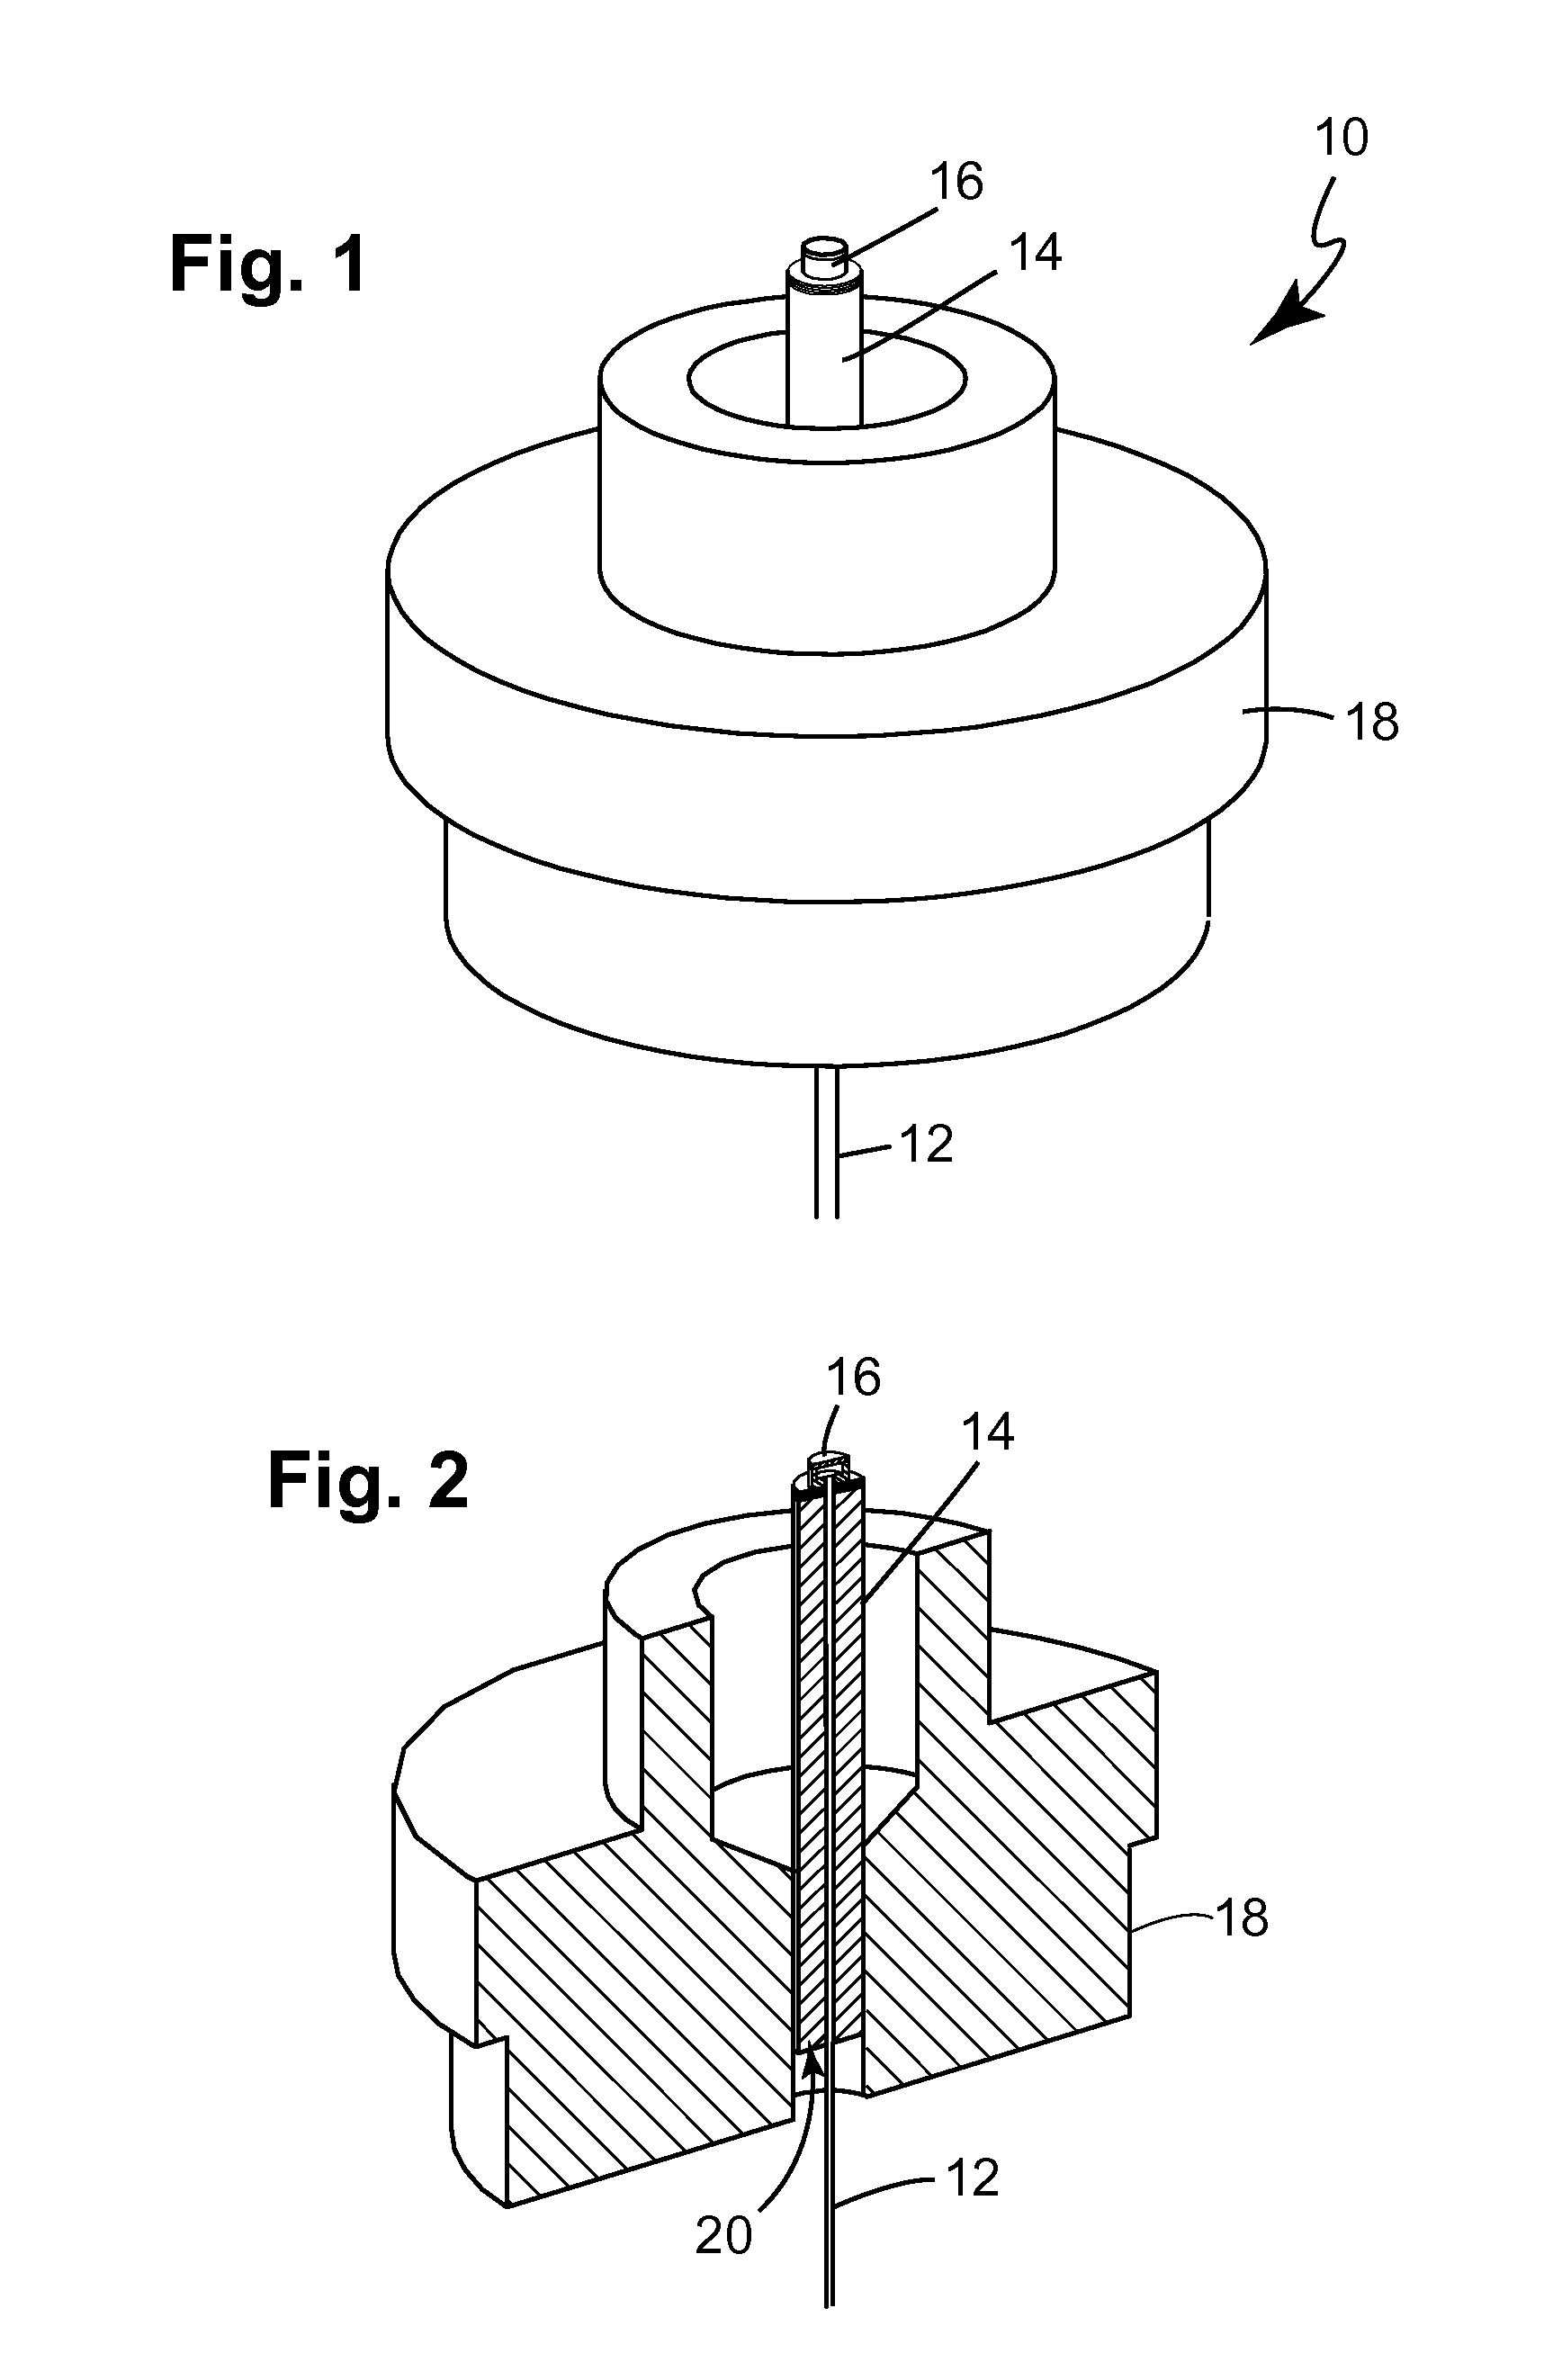 High-temperature pressure sensor and method of assembly